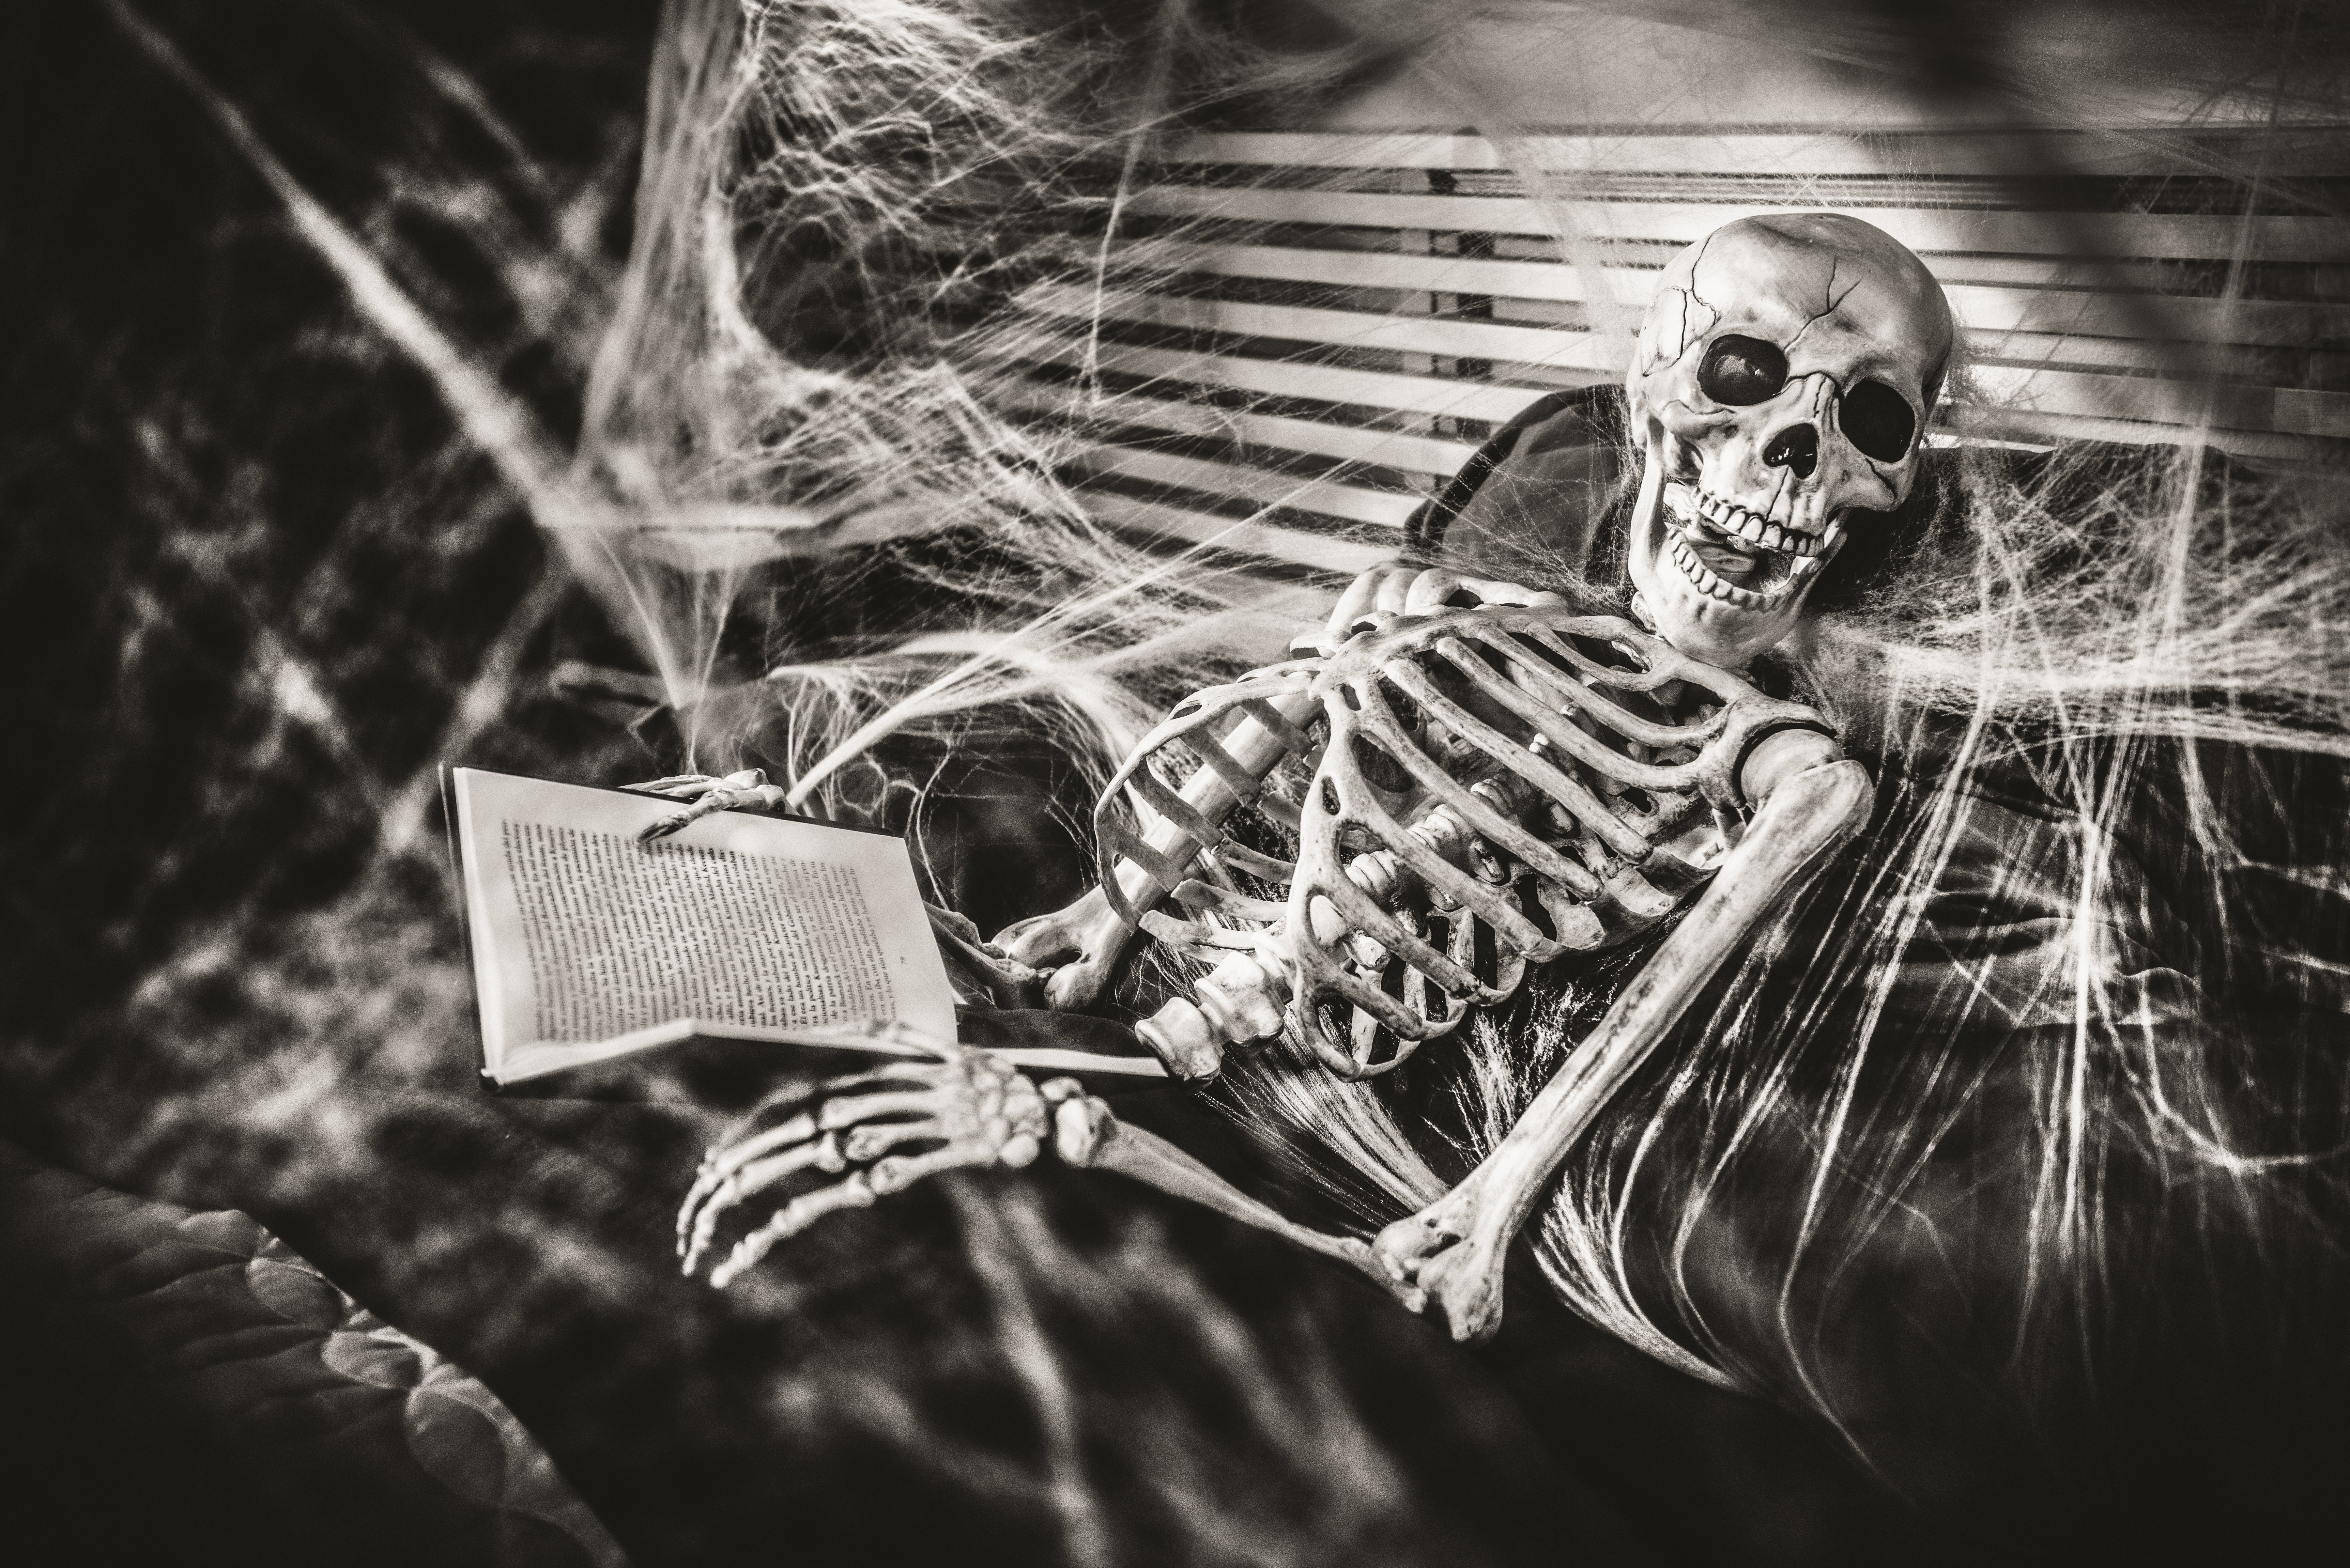 The Skeleton Reading a Book